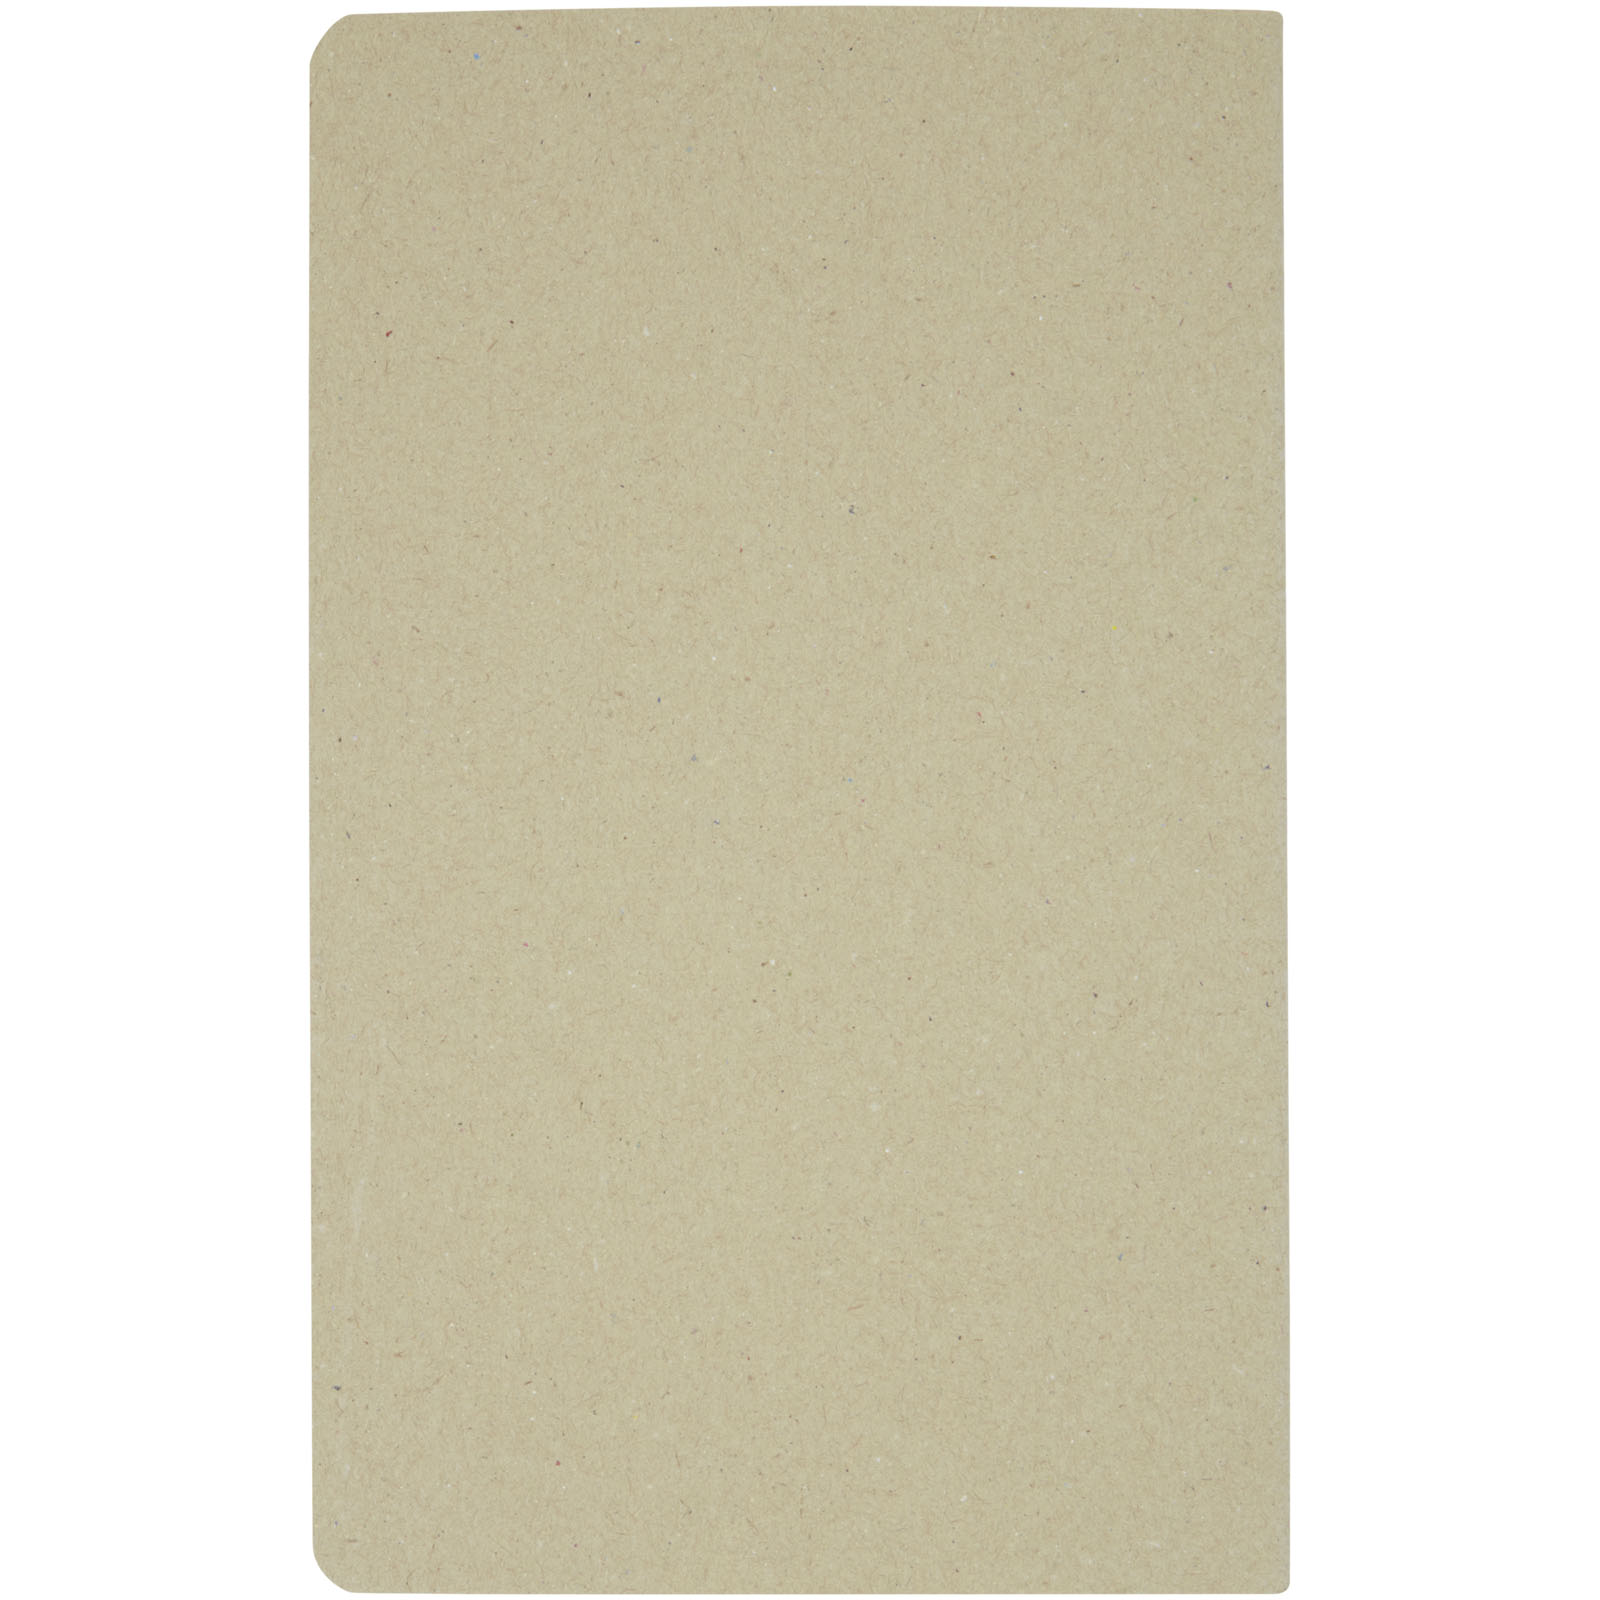 Advertising Notebooks - Gianna recycled cardboard notebook - 2